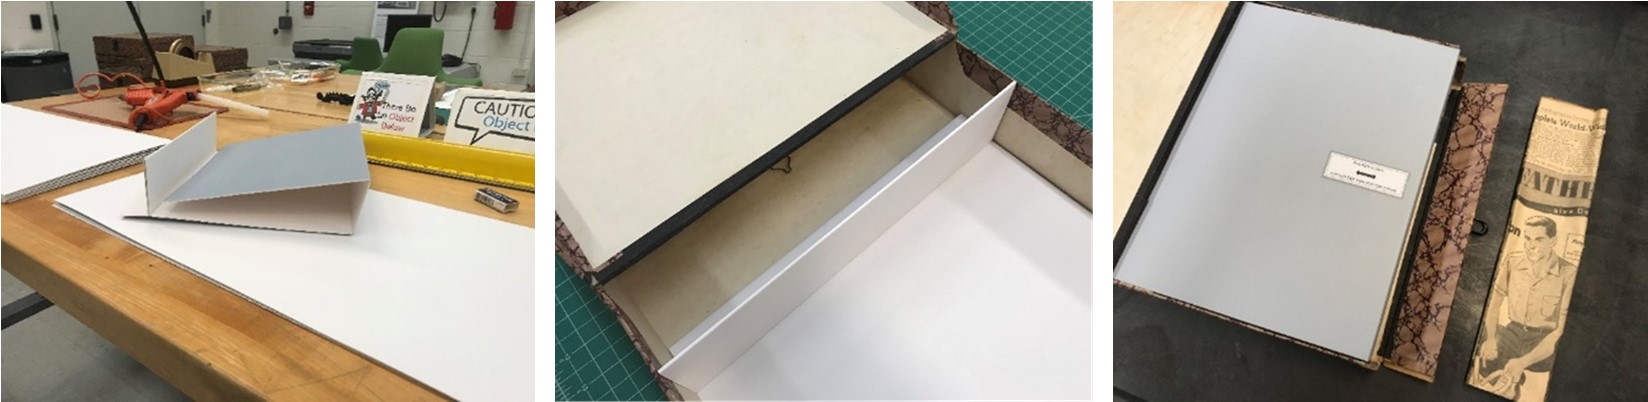 (Left): Image of book-storage cover folded up and resting on long table in museum conservation lab; (Center): Photograph of book-storage cover opened and resting on green mat’ (Right): Photograph of album/book within book cover/box